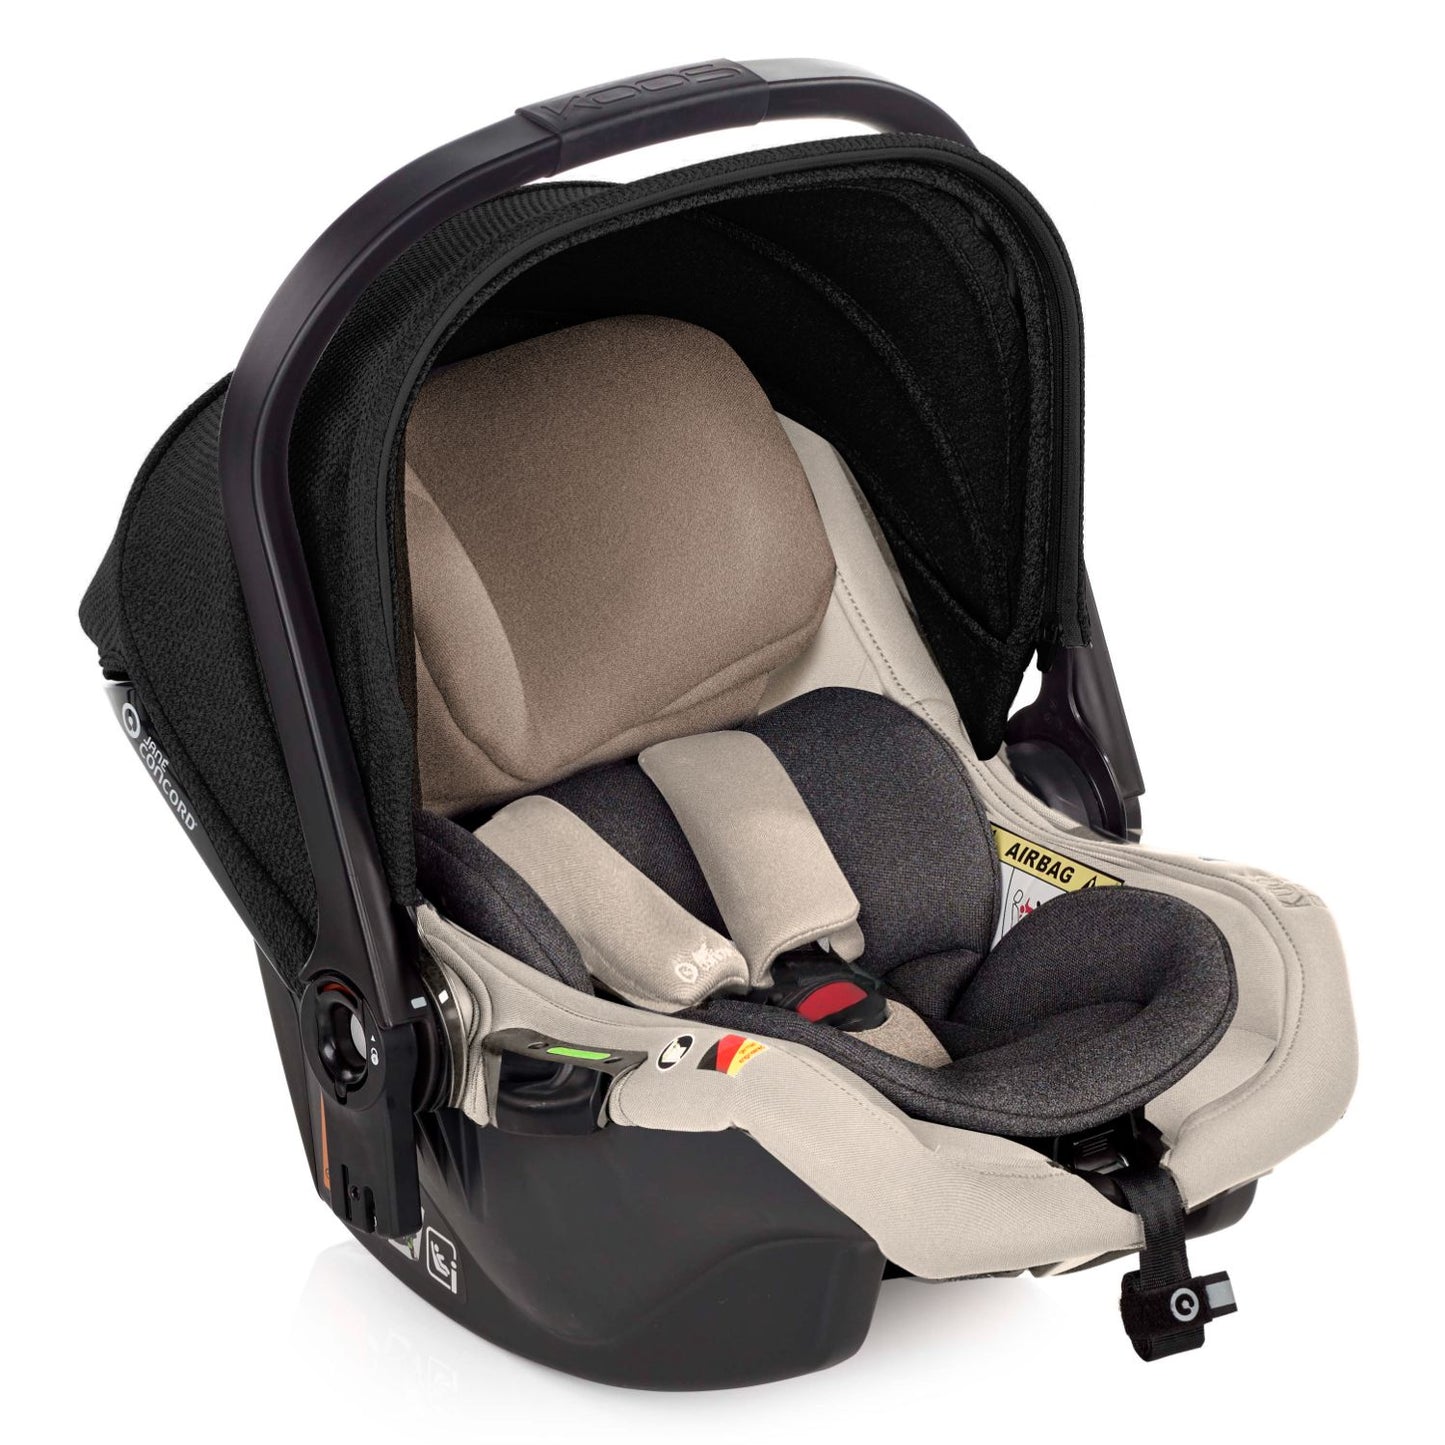 Jané Trider + Sweet Carrycot + Koos iSize 3-in-1 Travel System